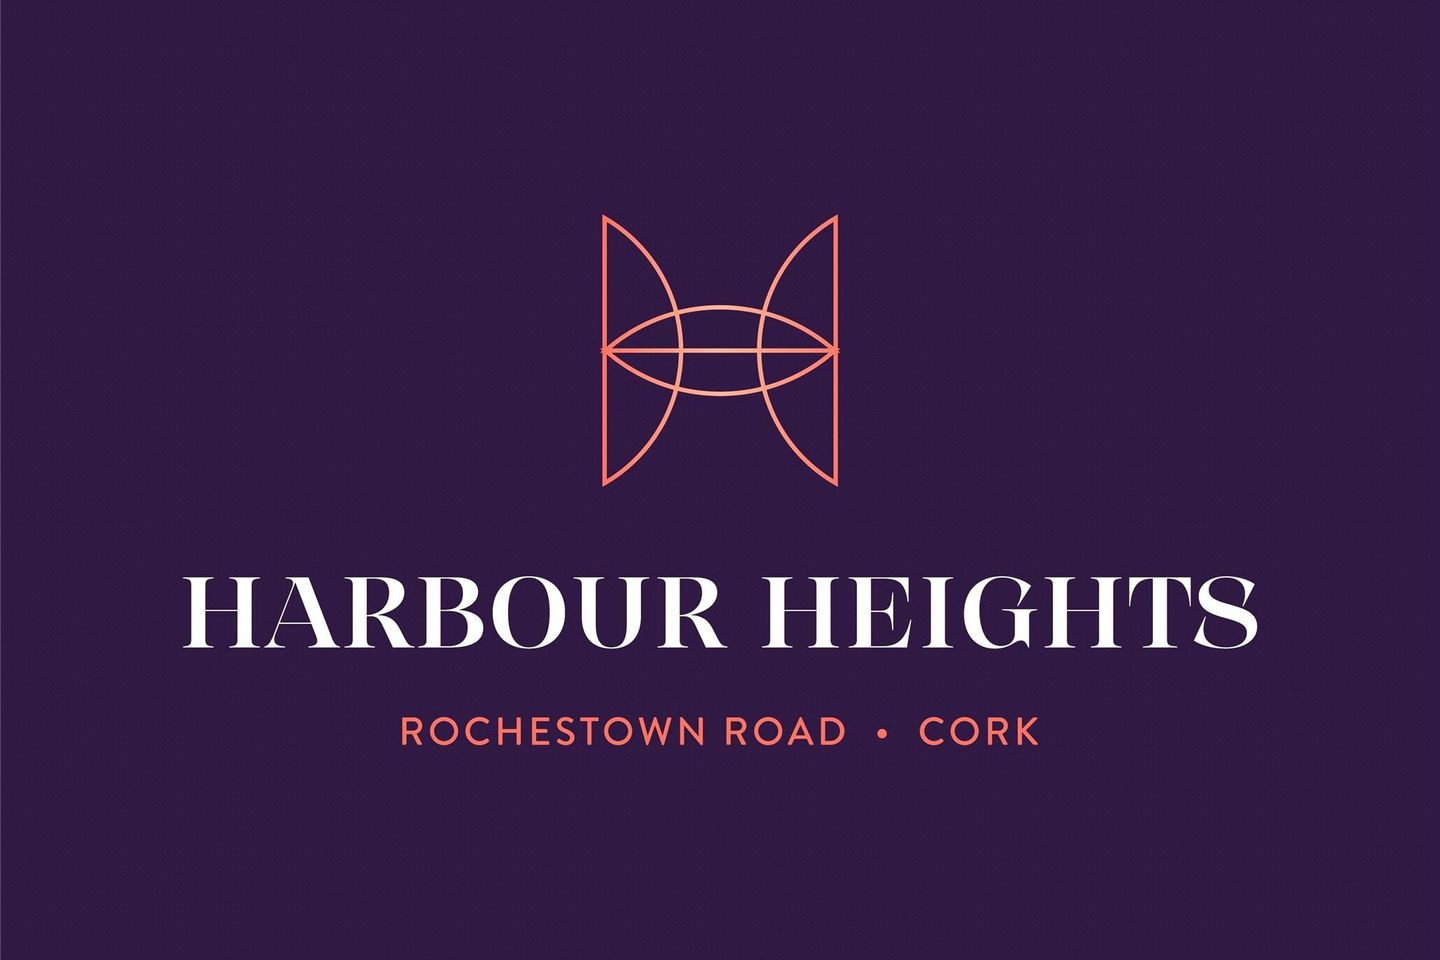 Type A3 - Three Bed Mid/End Terrace, Harbour Heights, Type A3 - Three Bed Mid/End Terrace, Harbour Heights, Rochestown, Co. Cork